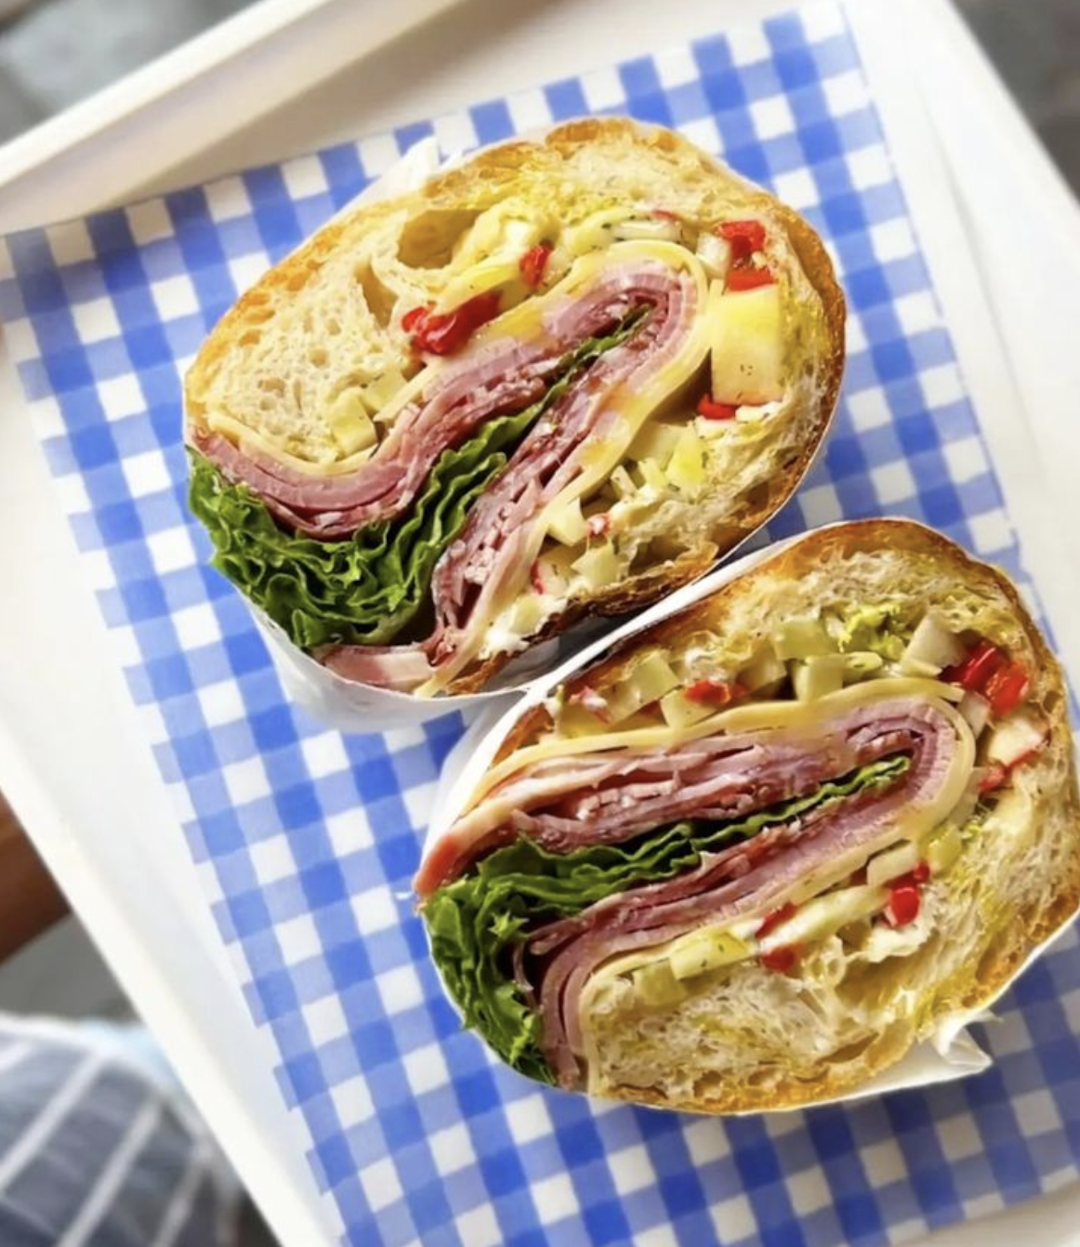 Hero image for supplier Micky's - Sandwiches